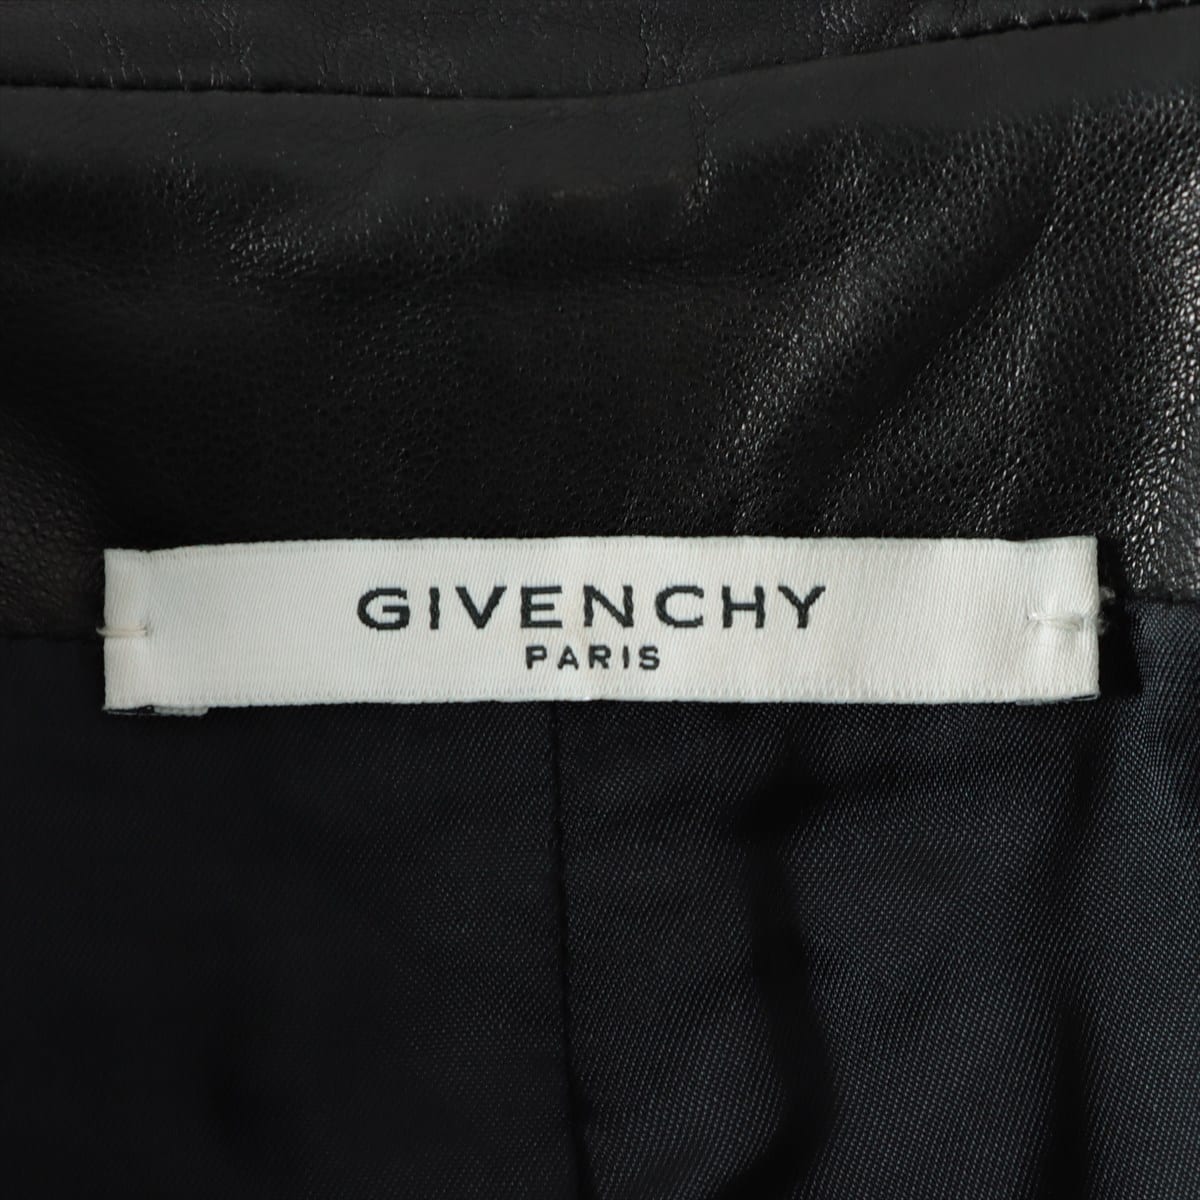 Givenchy Lambskin Leather jacket 36 Ladies' Black  15A1611654